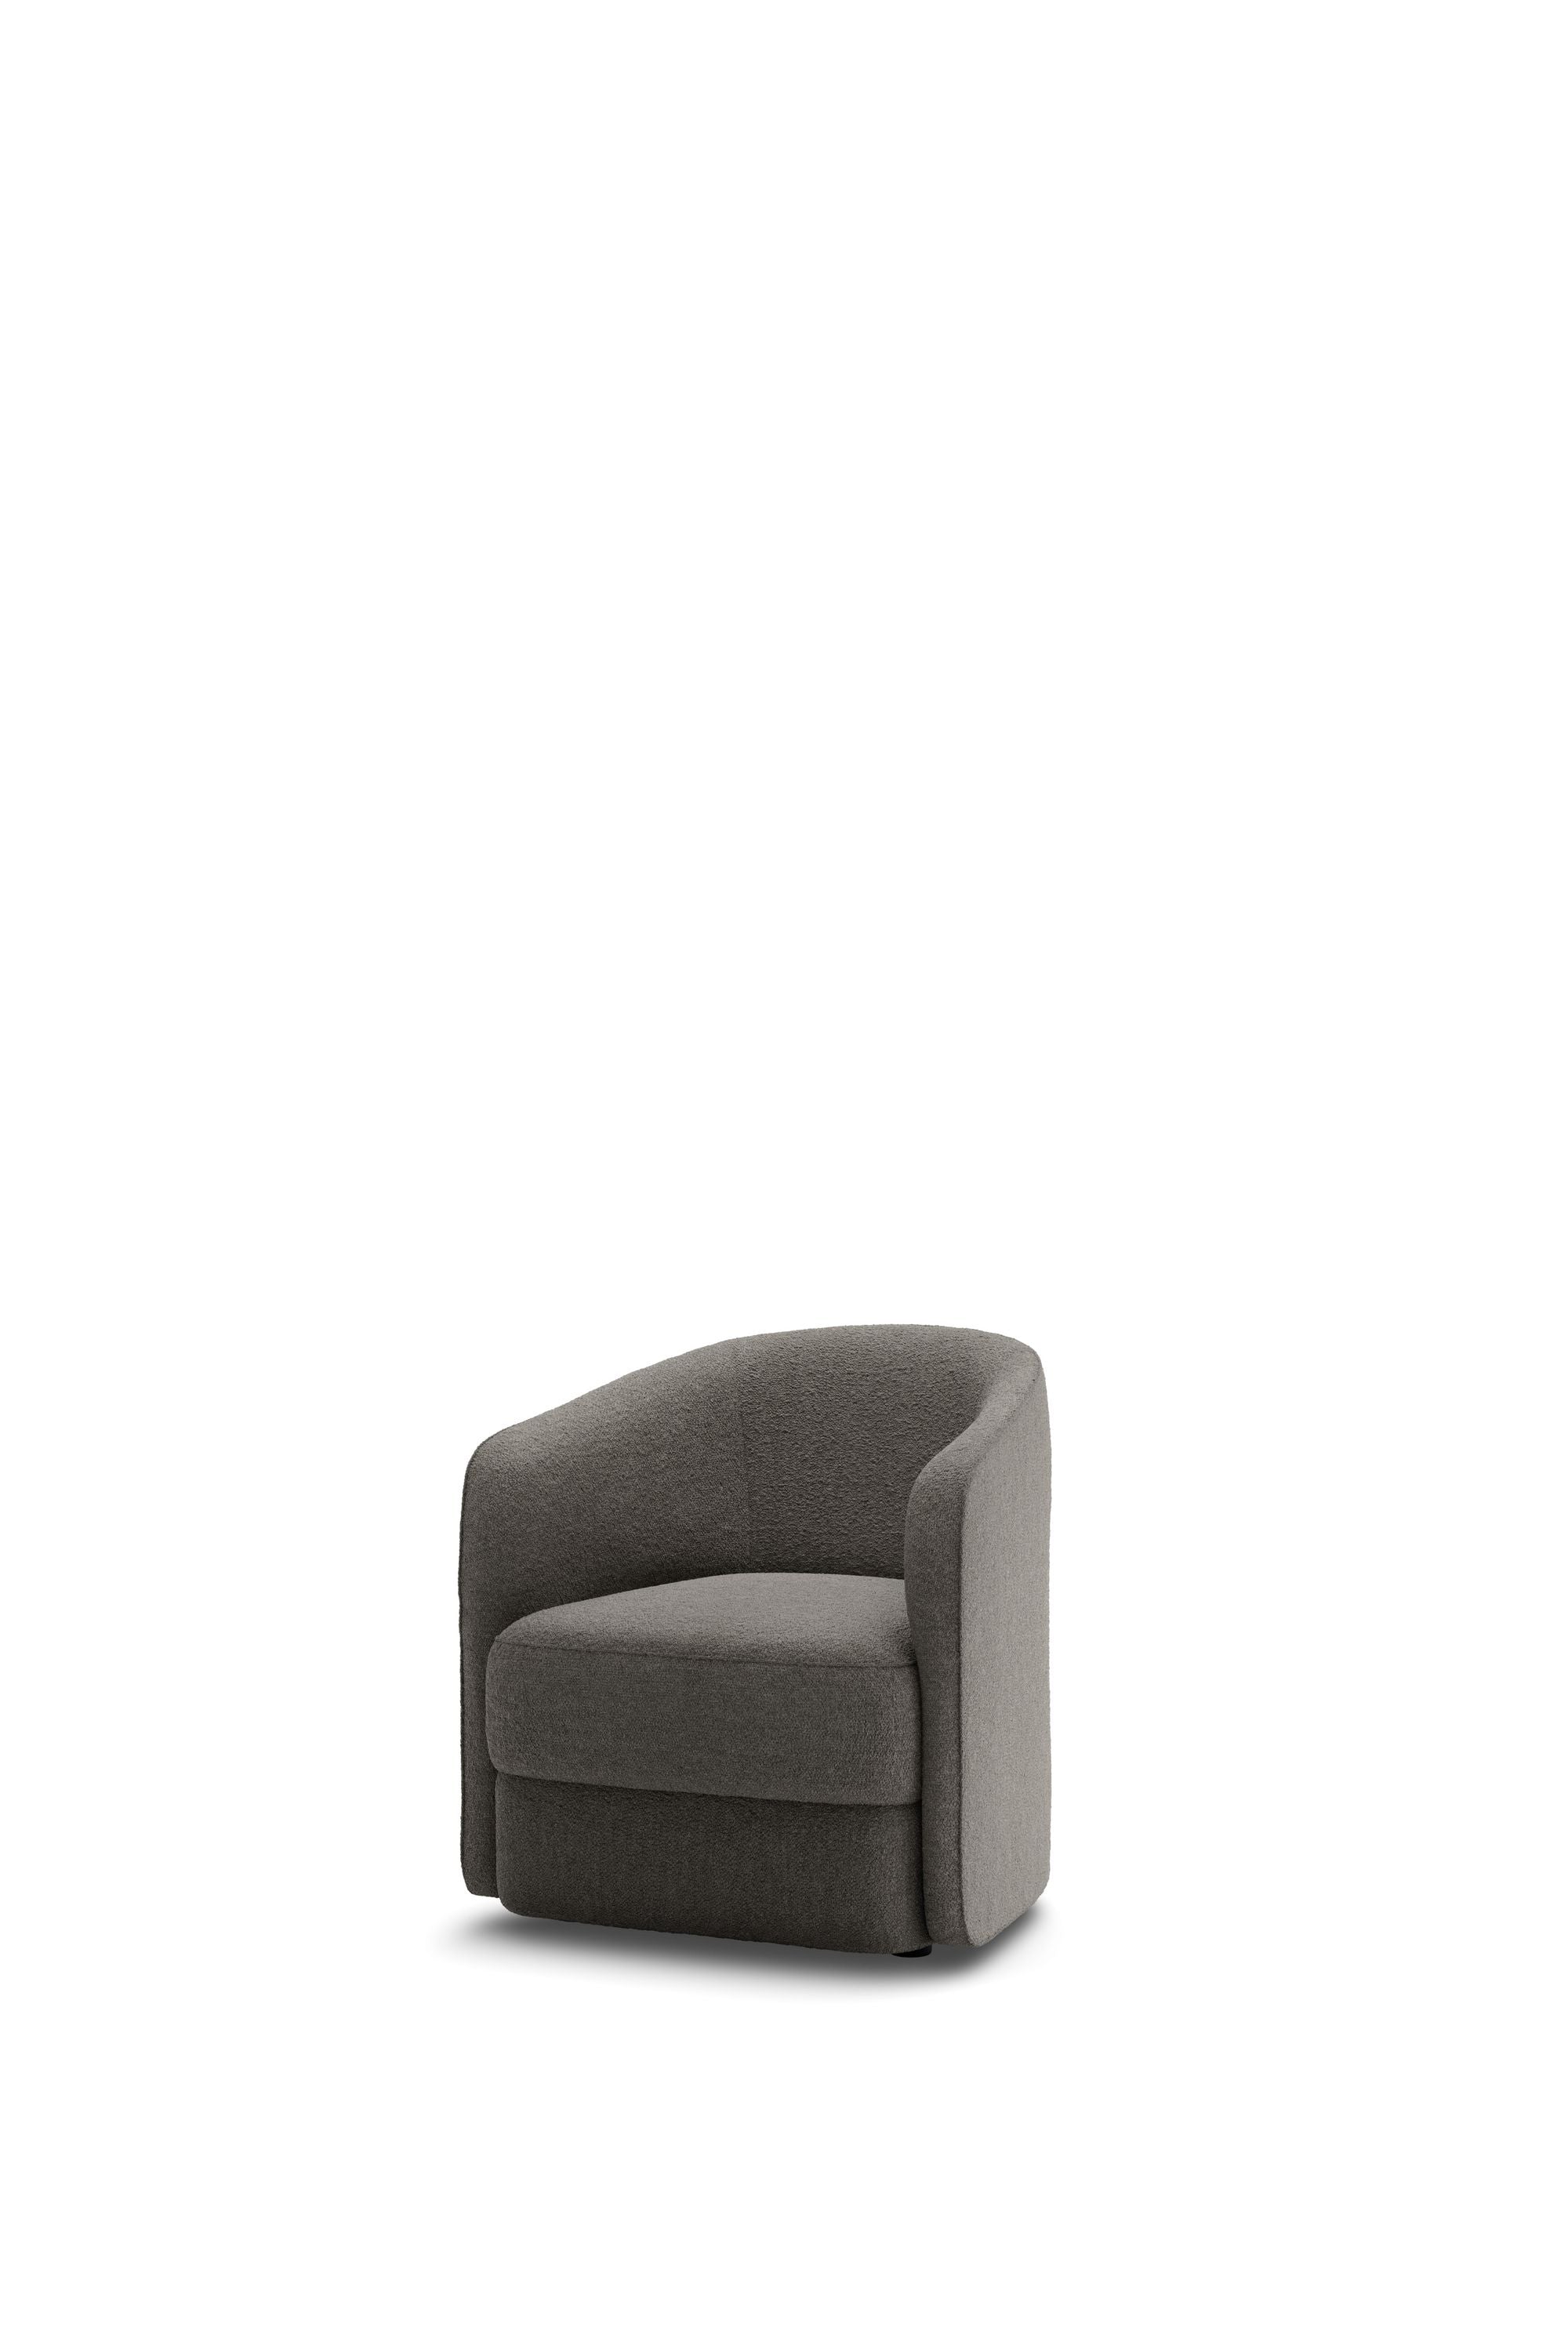 New Works Covent Lounge Chair Narrow, Dark Taupe